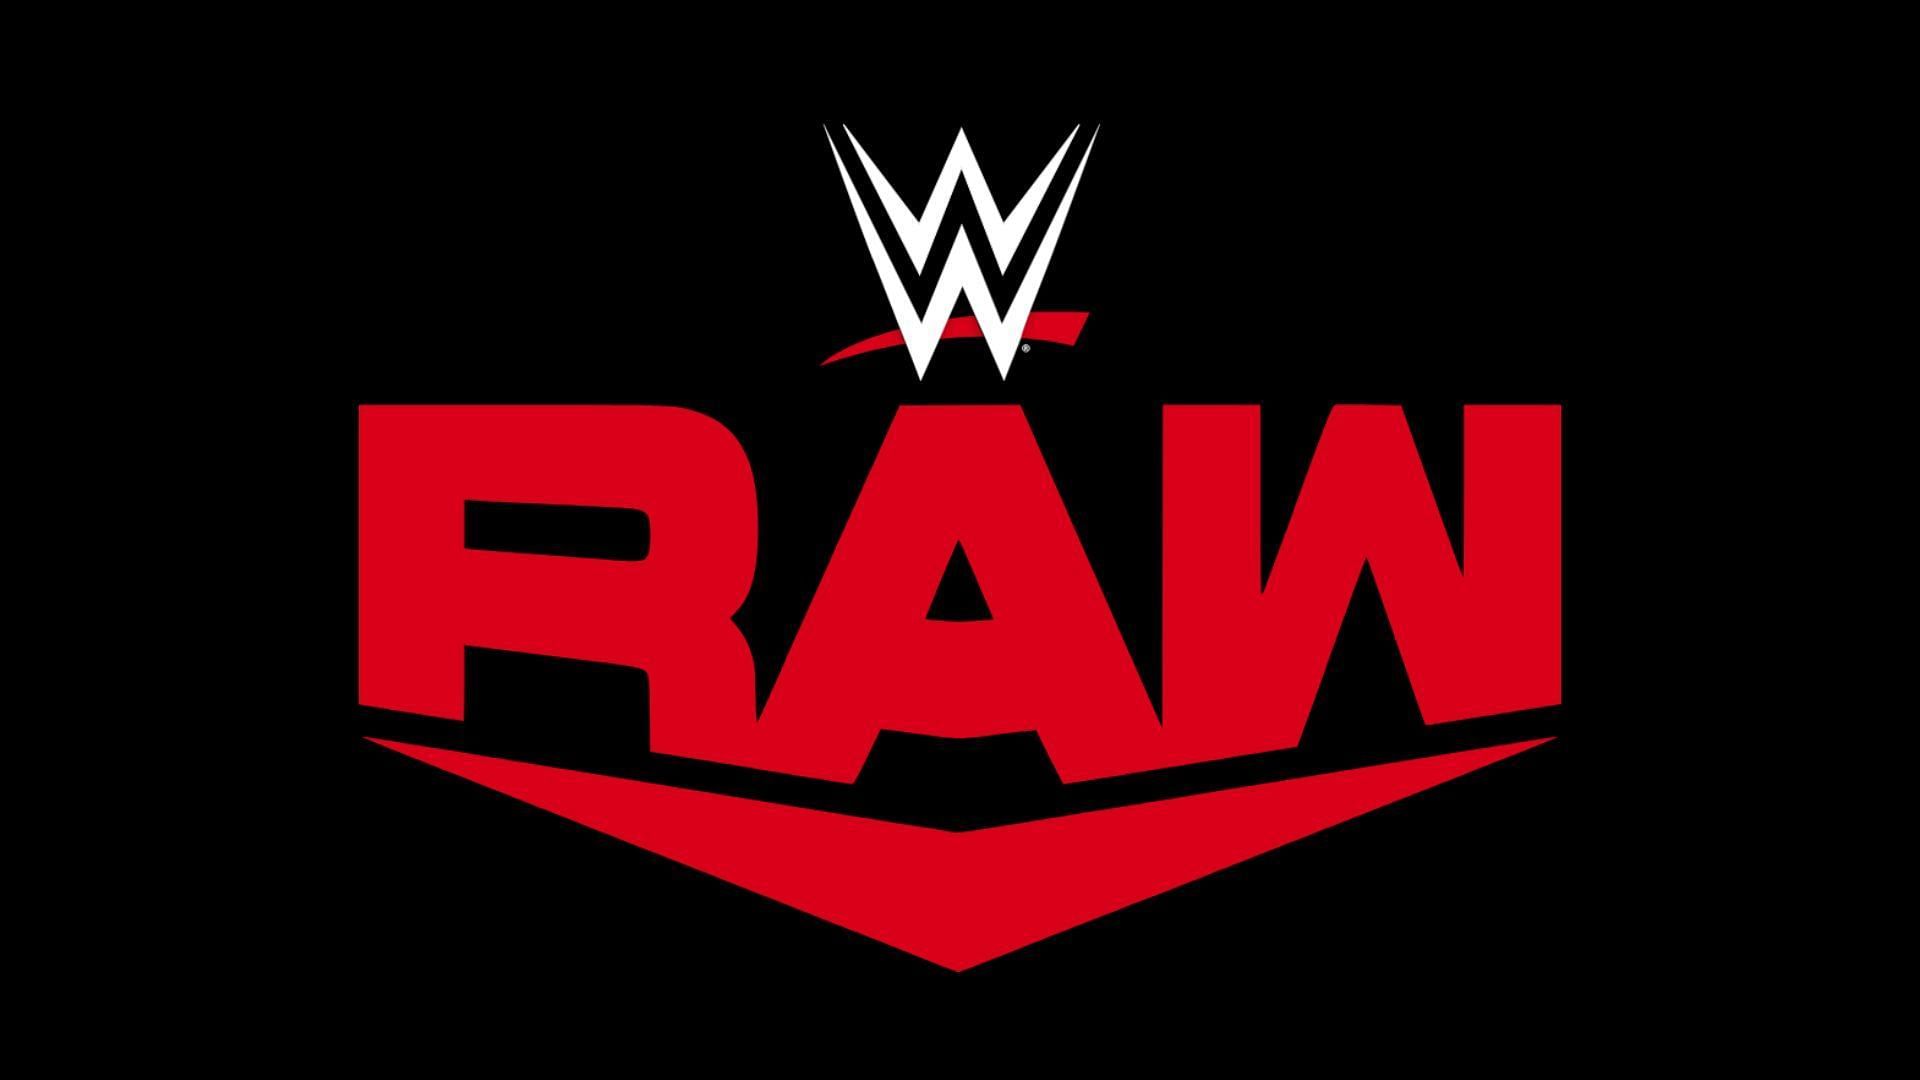 WWE RAW after Elimination Chamber featured a solid match between Mustafa Ali and Dolph Ziggler